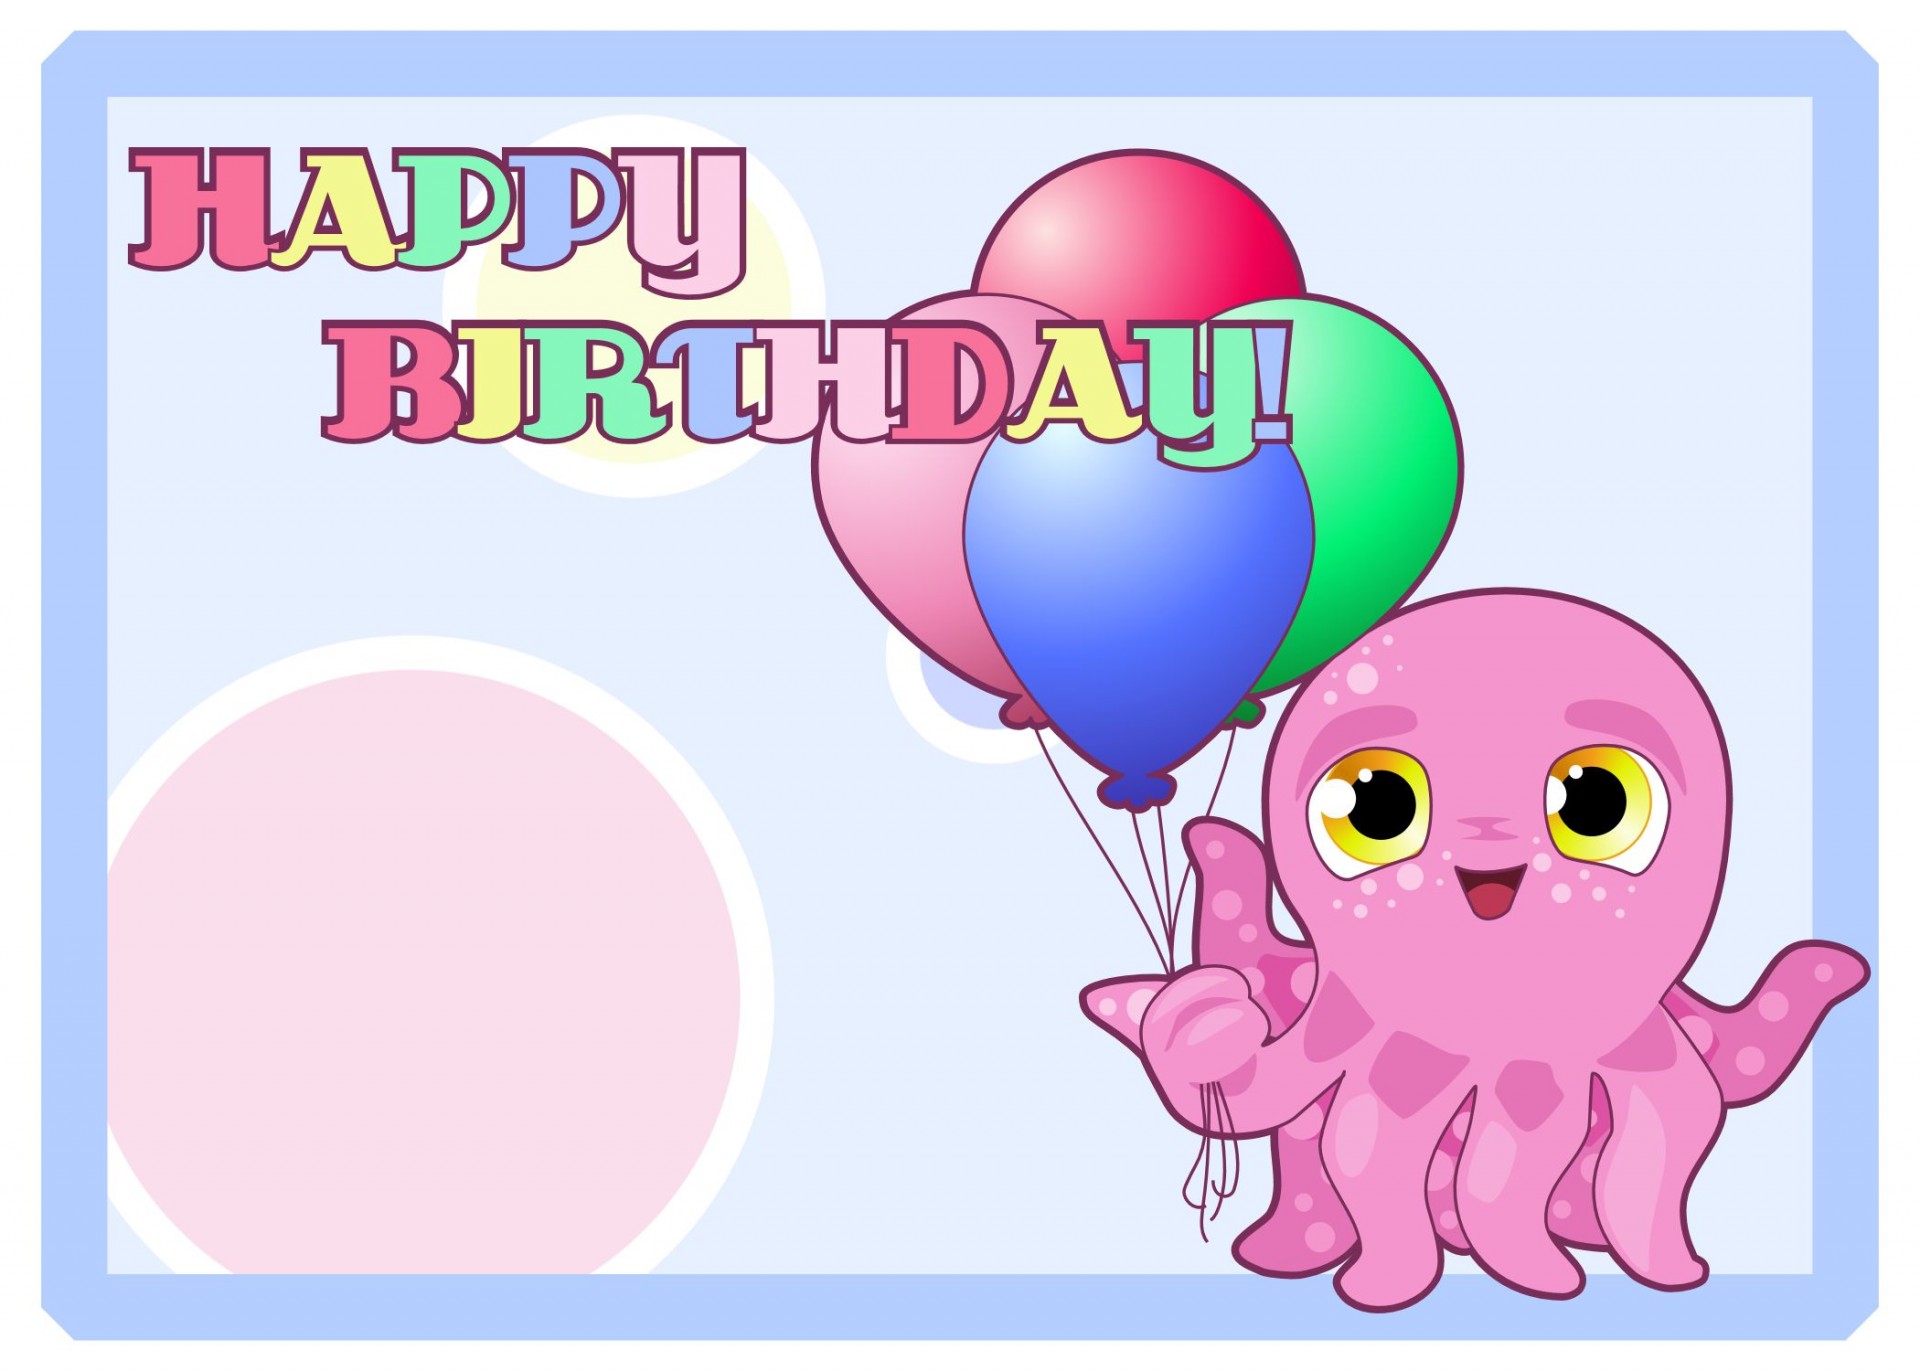 Sized for standard greeting cards, cartoon octopus and balloons